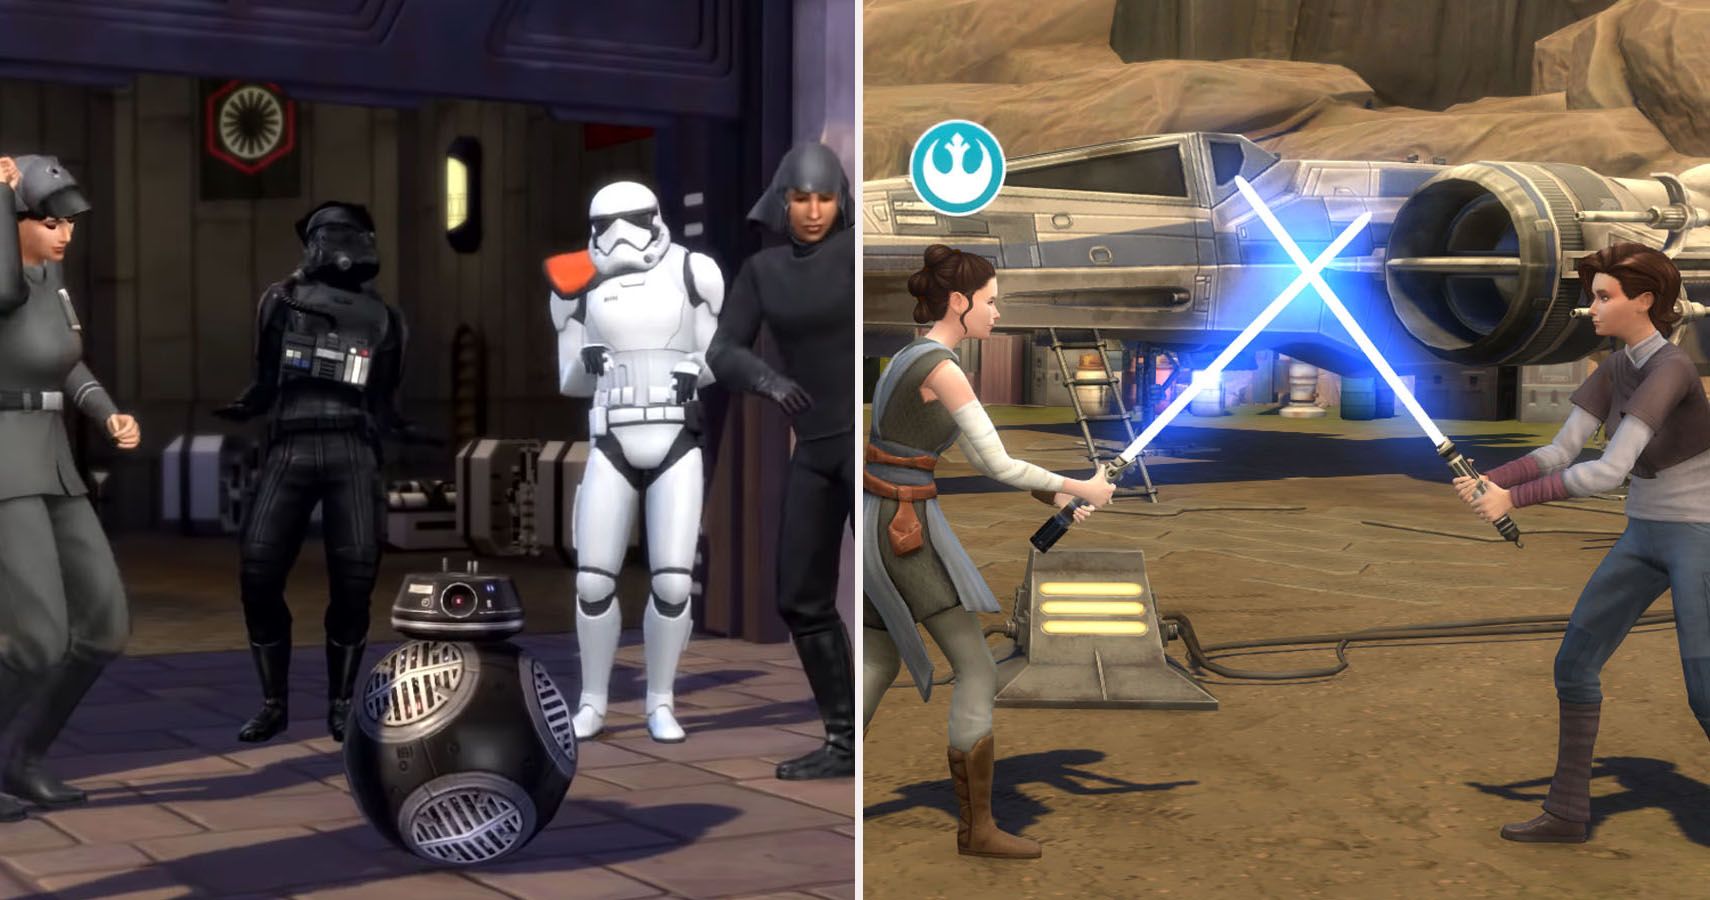 Dancing first order on the left and rey and a sim in a lightsaber duel on the right.